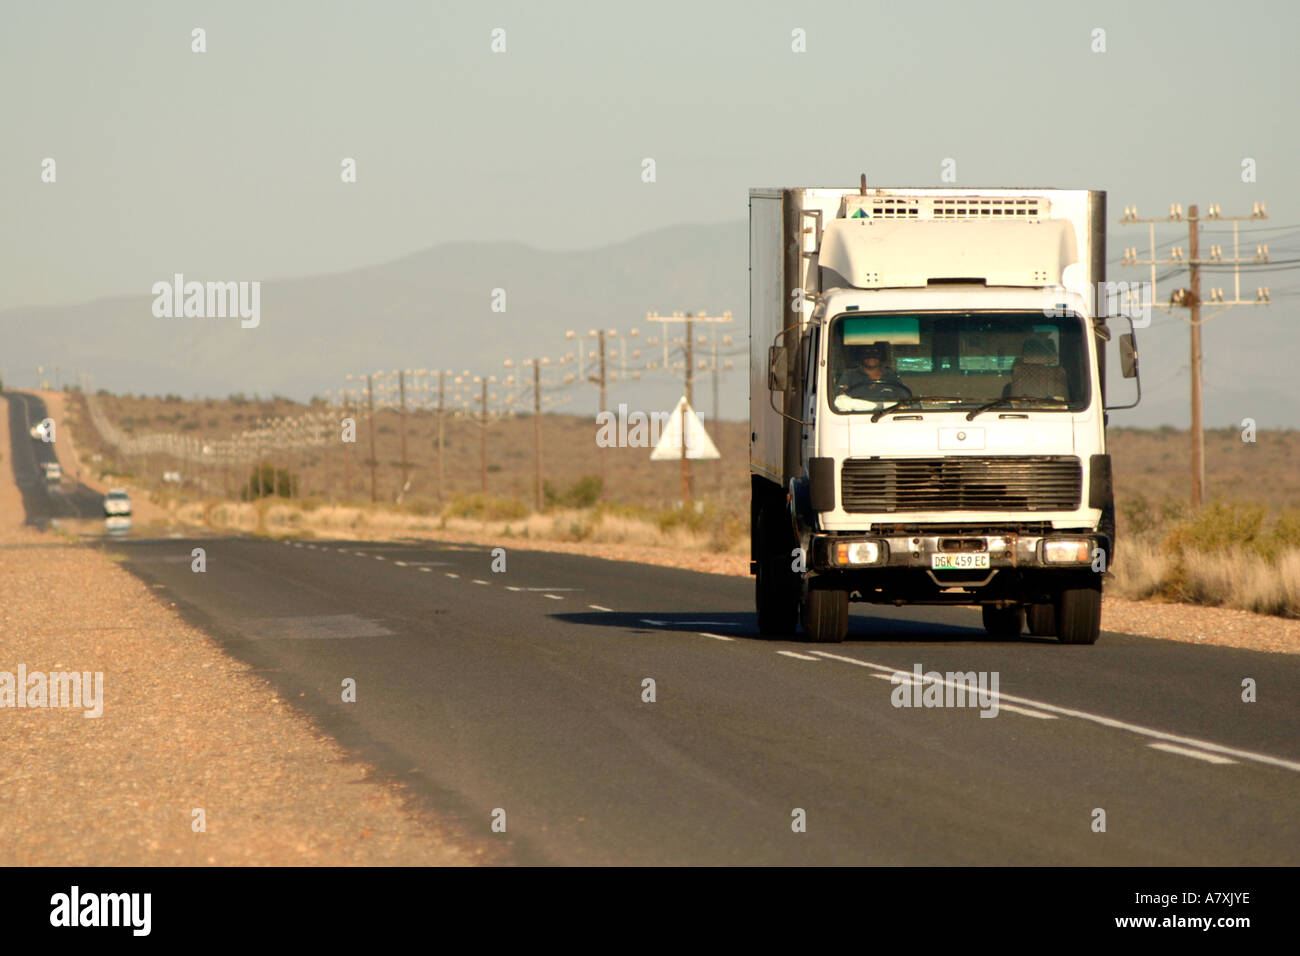 A truck on the R62 road leading to Oudtshoorn in the Karoo region of South Africa's Western Cape Province. Stock Photo